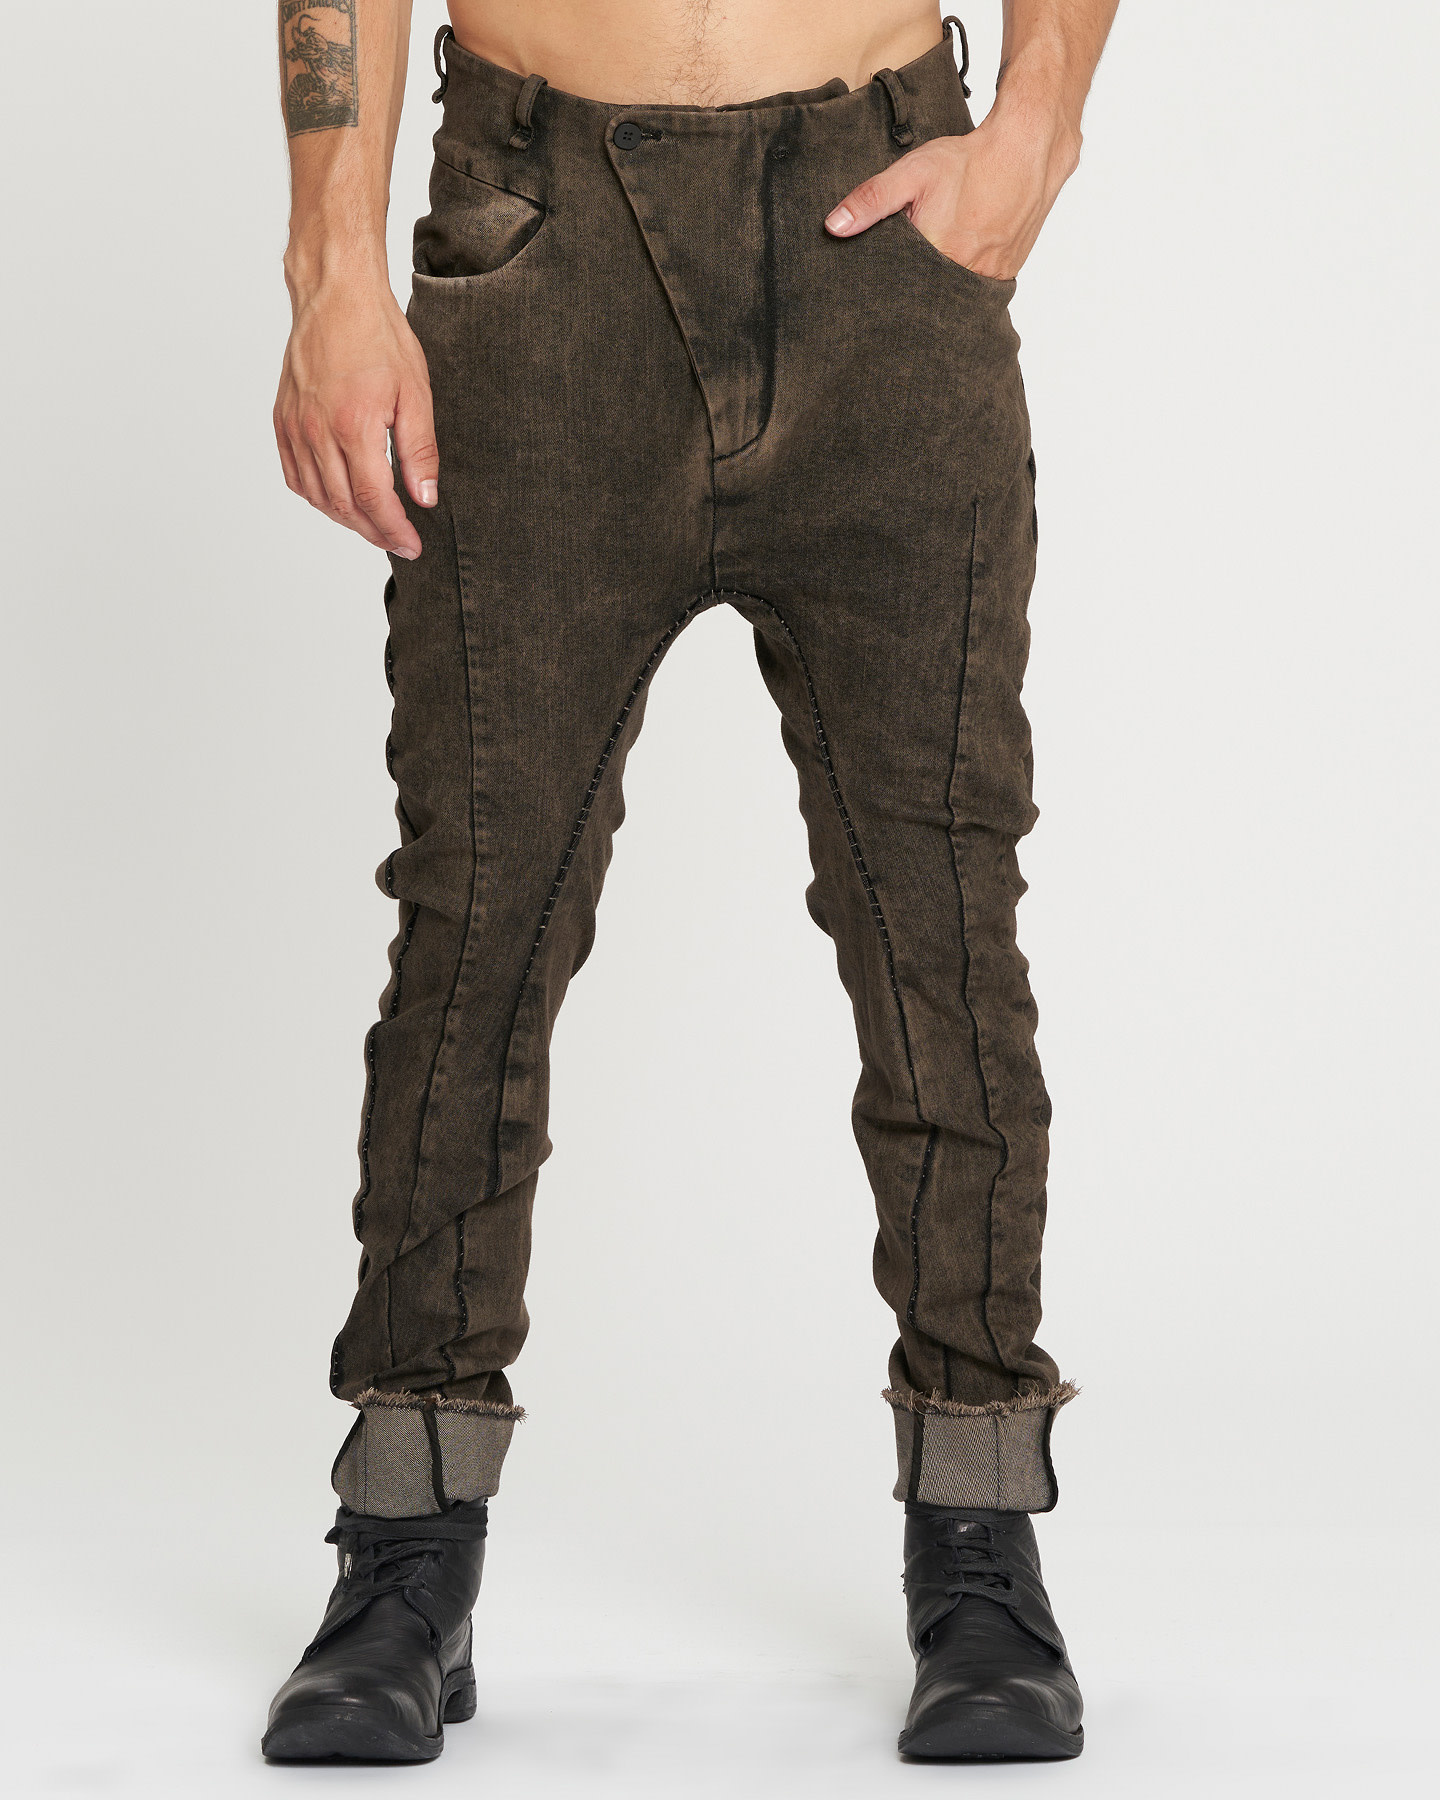 RELAX SEAMED JEANS - BLACK CLAY